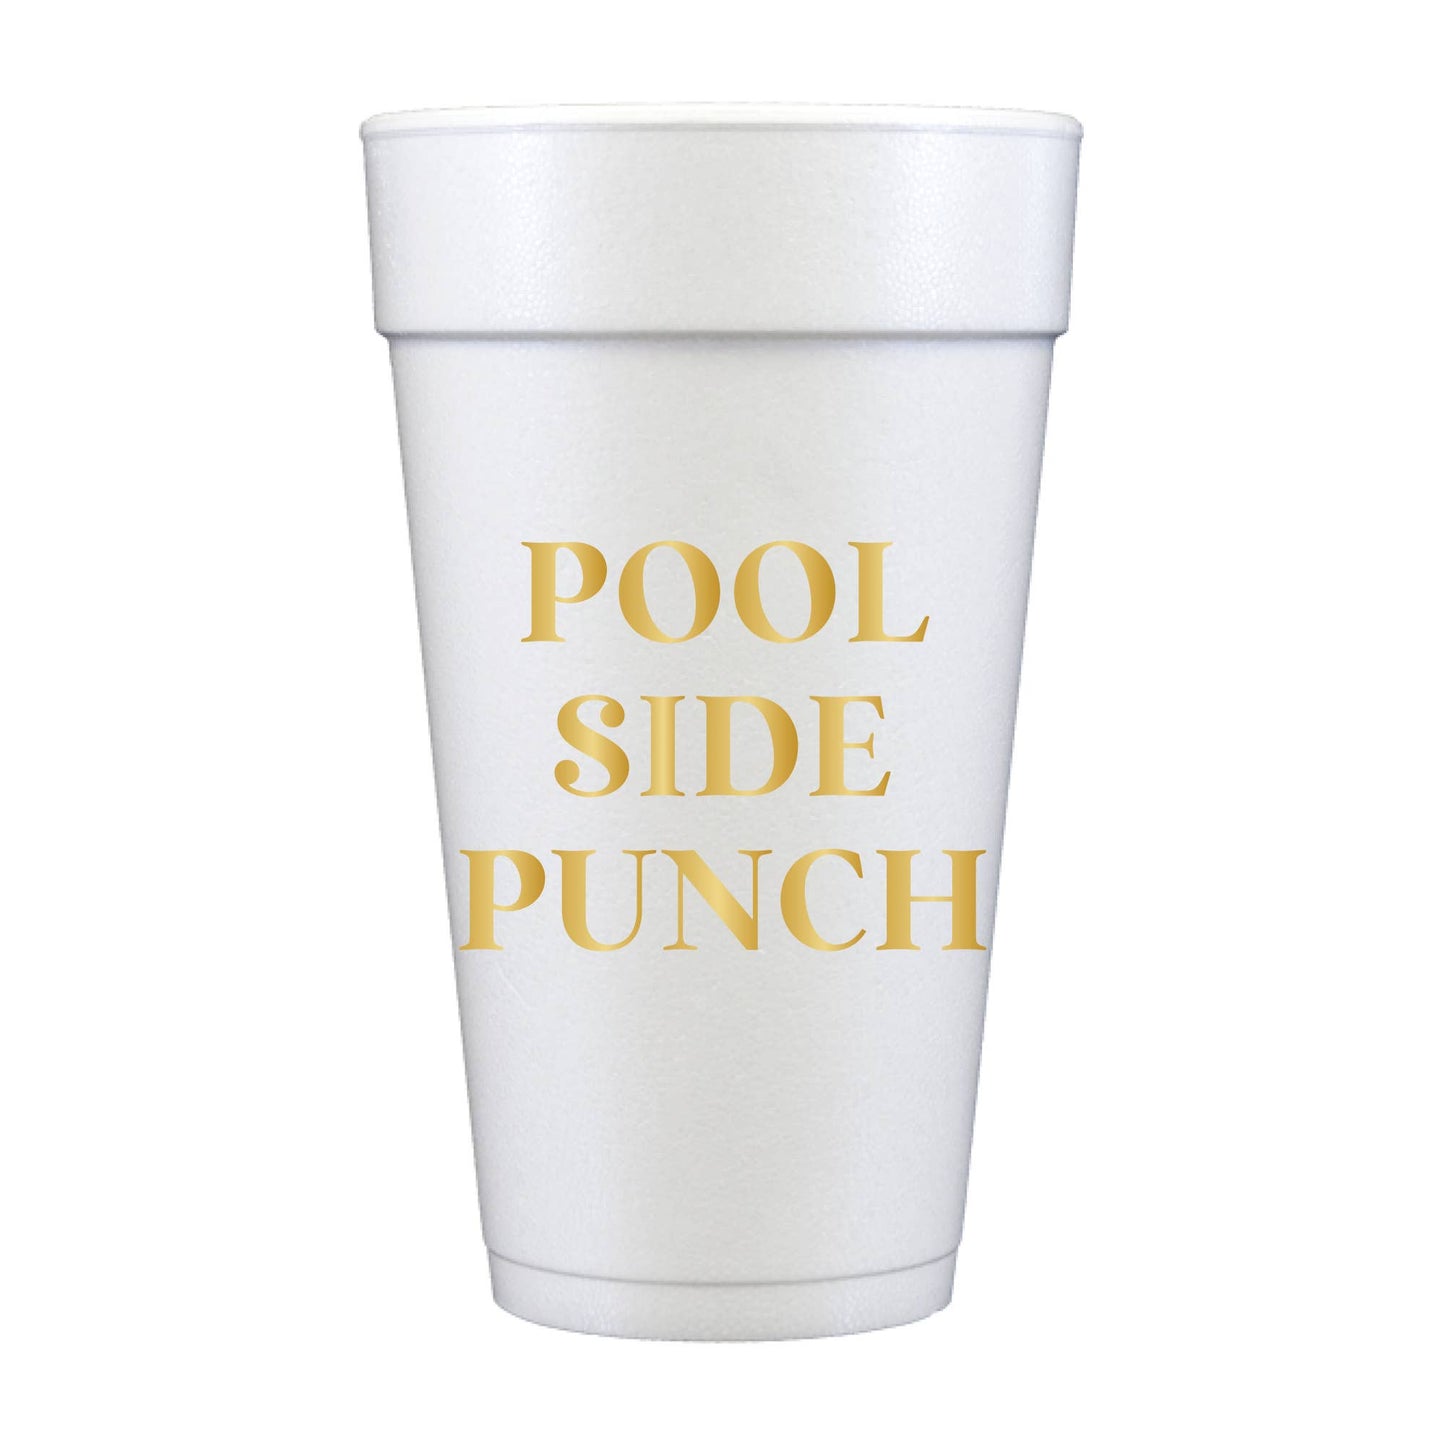 Pool Side Punch Summer Vacation - 10 Foam Cups 20oz